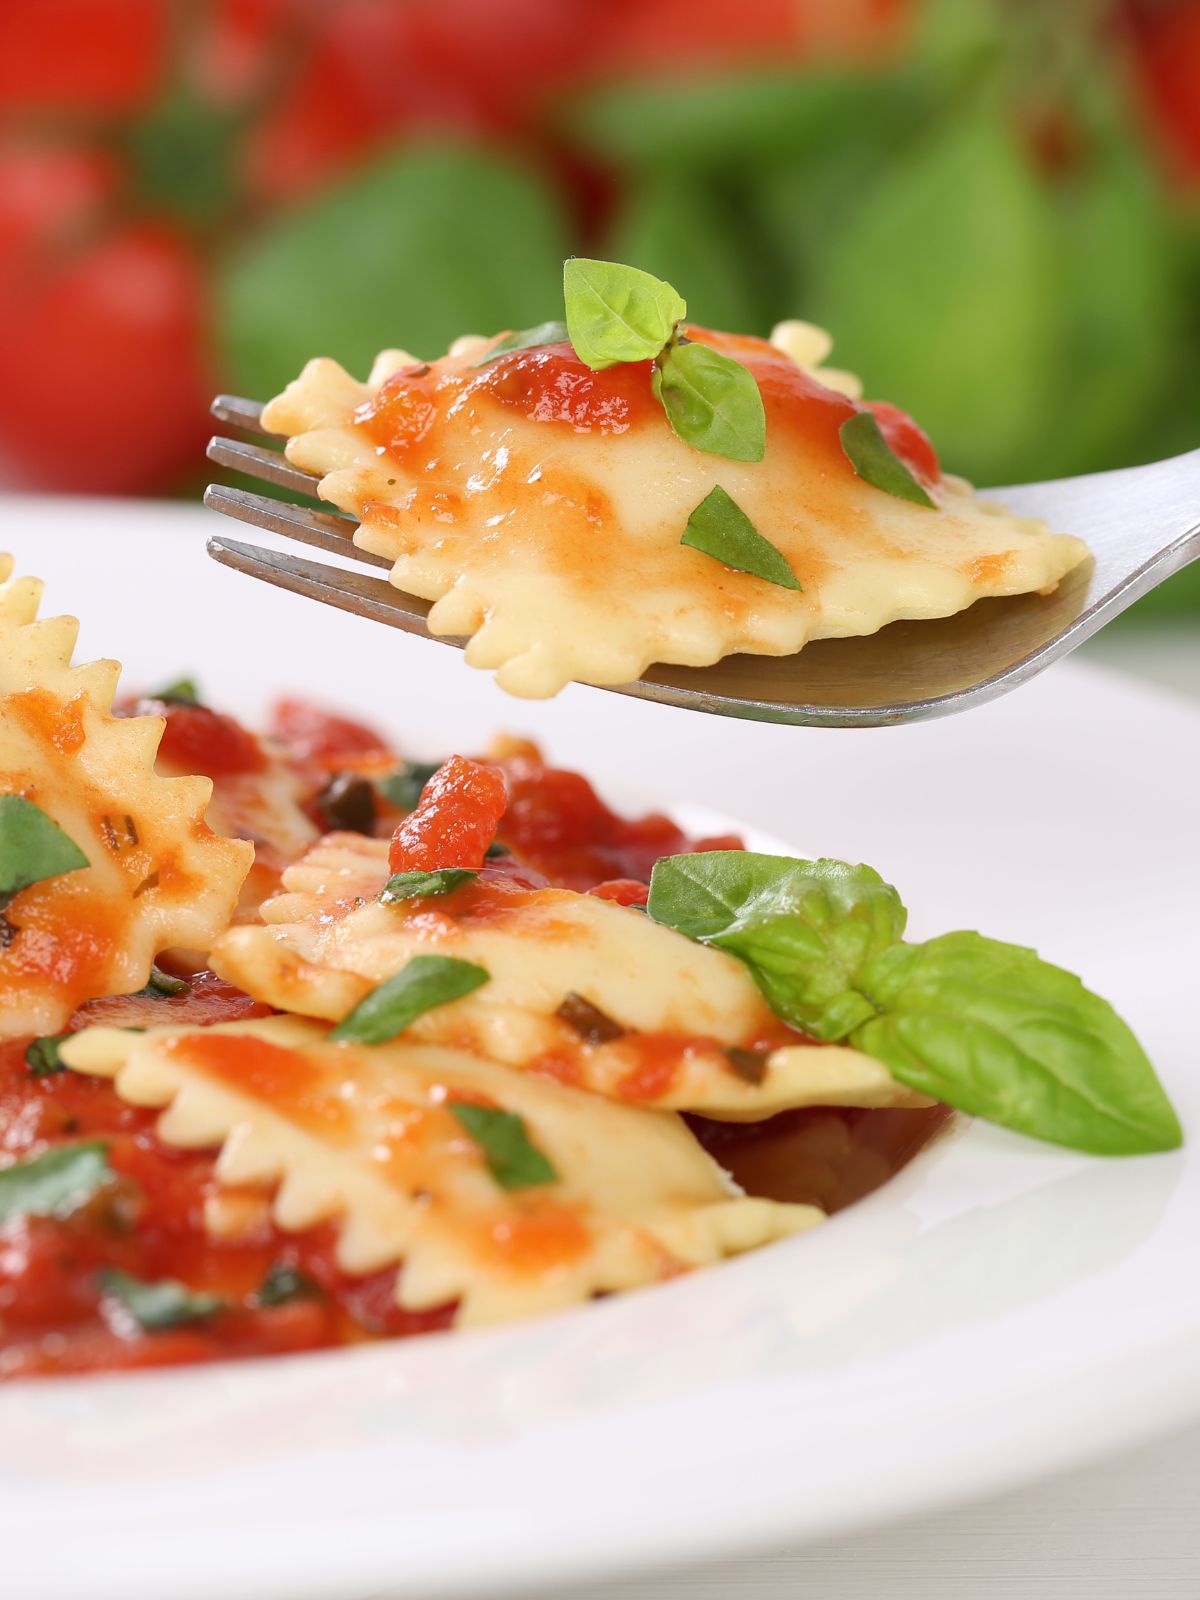 homemade ravioli with cheese on fork.